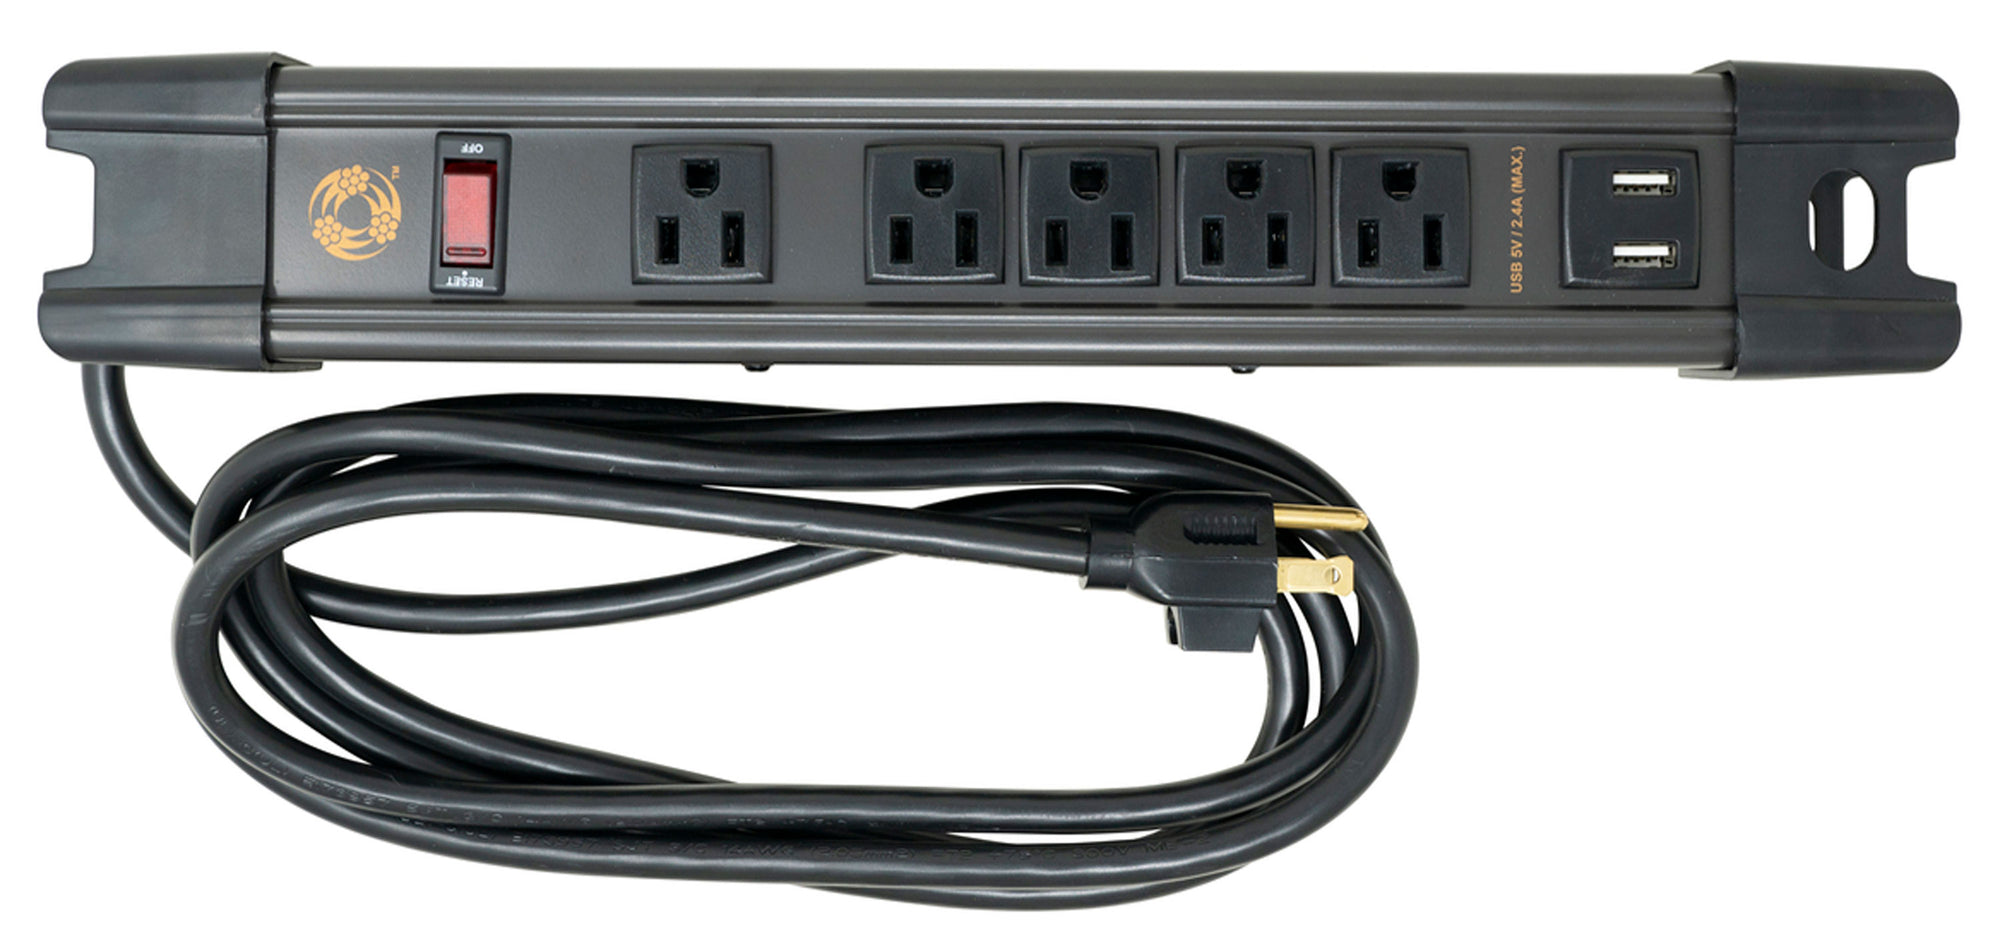 Southwire 5127 All-Metal Heavy-Duty Magnetic Power Strip with 2.4 USB, 5 Outlets, 8' Cord